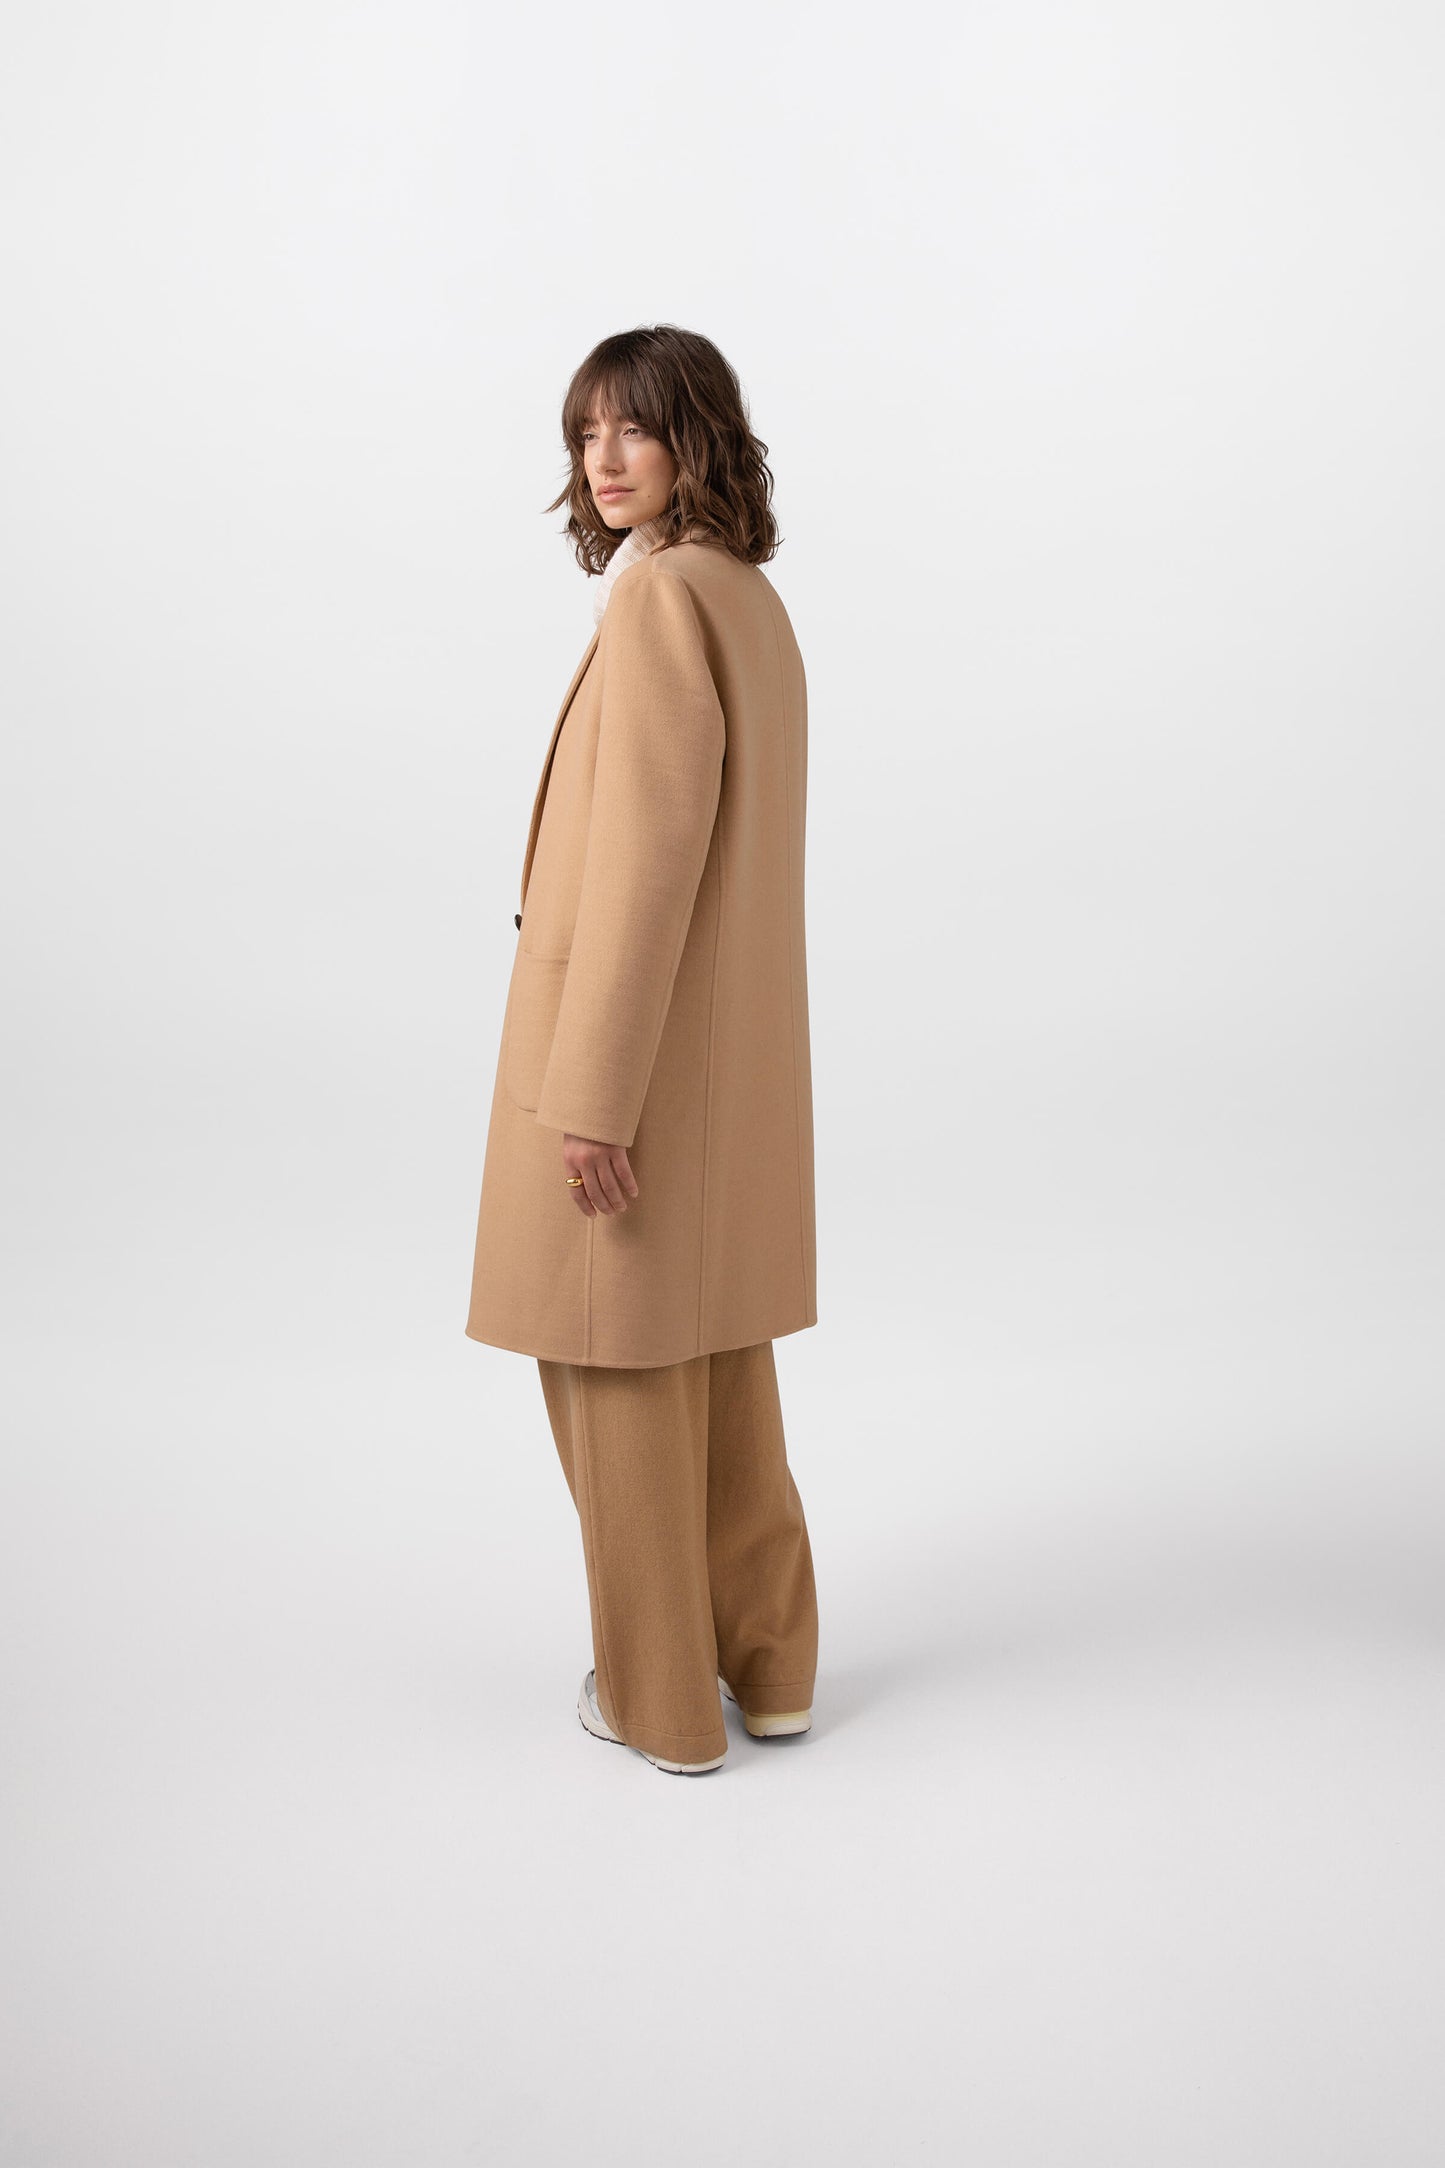 Johnstons of Elgin Women's Cashmere Crombie Coat in Camel on a white background TA000520RU7397